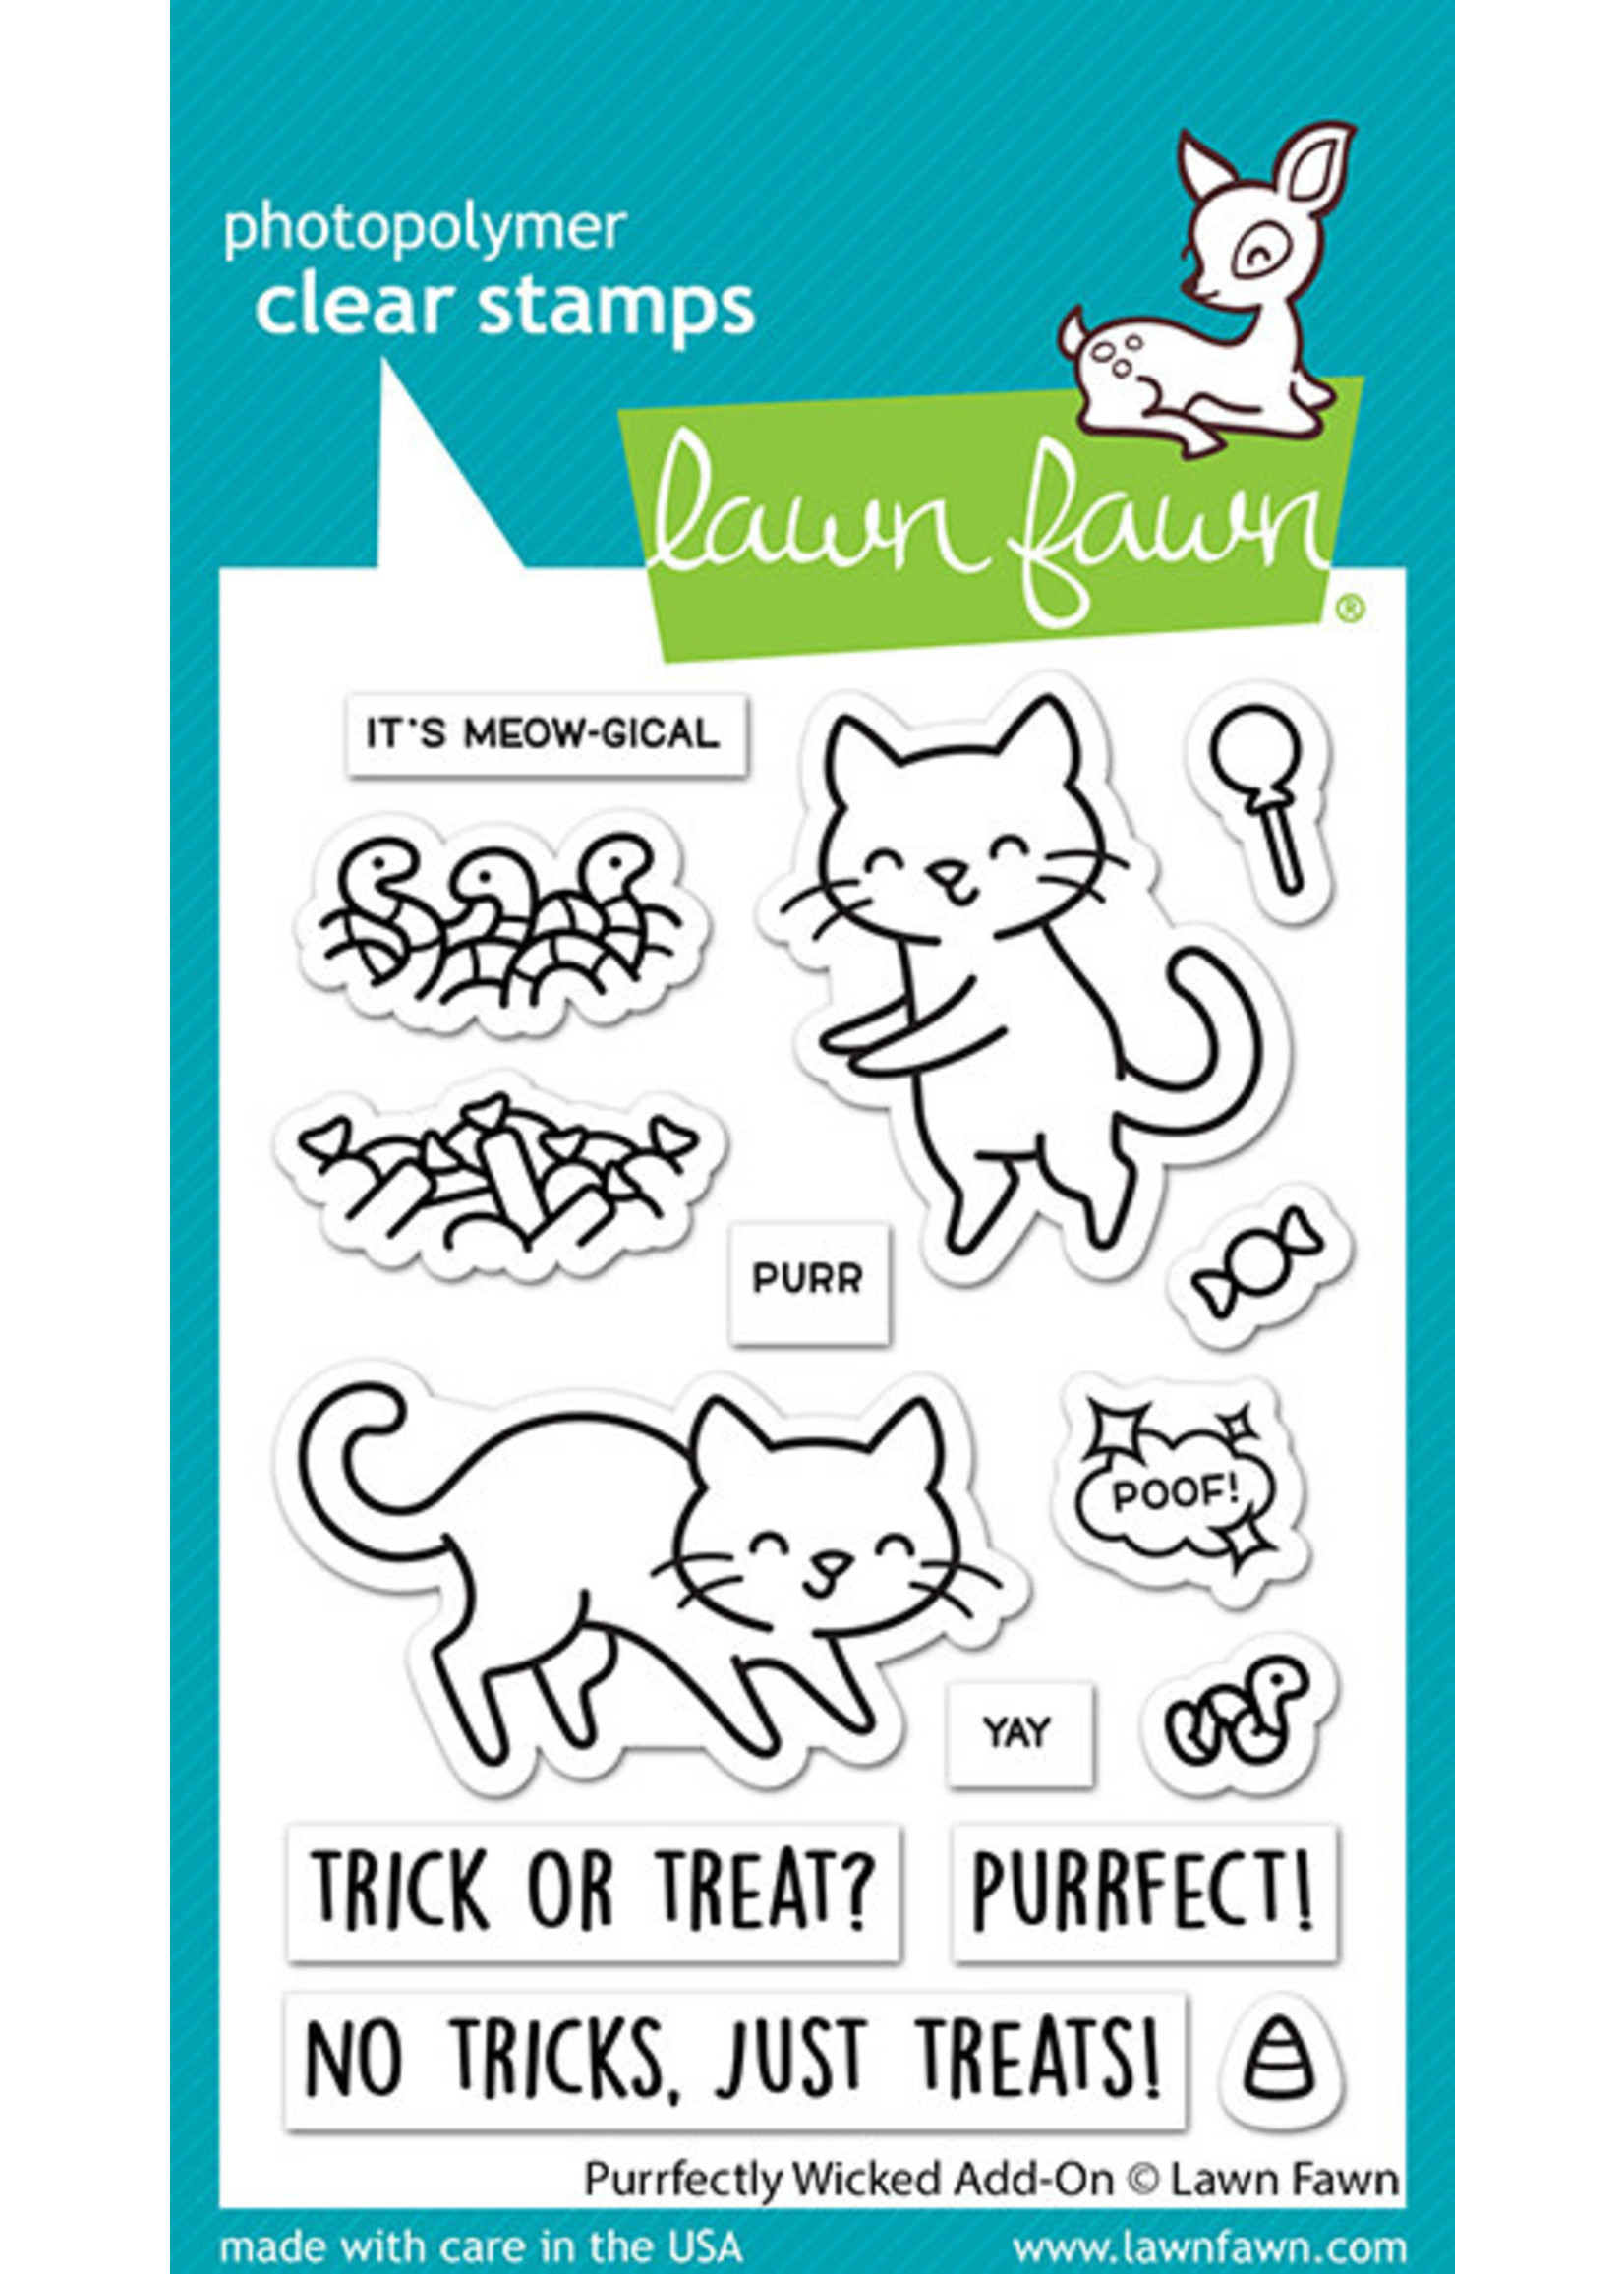 Lawn Fawn purrfectly wicked add-on stamp